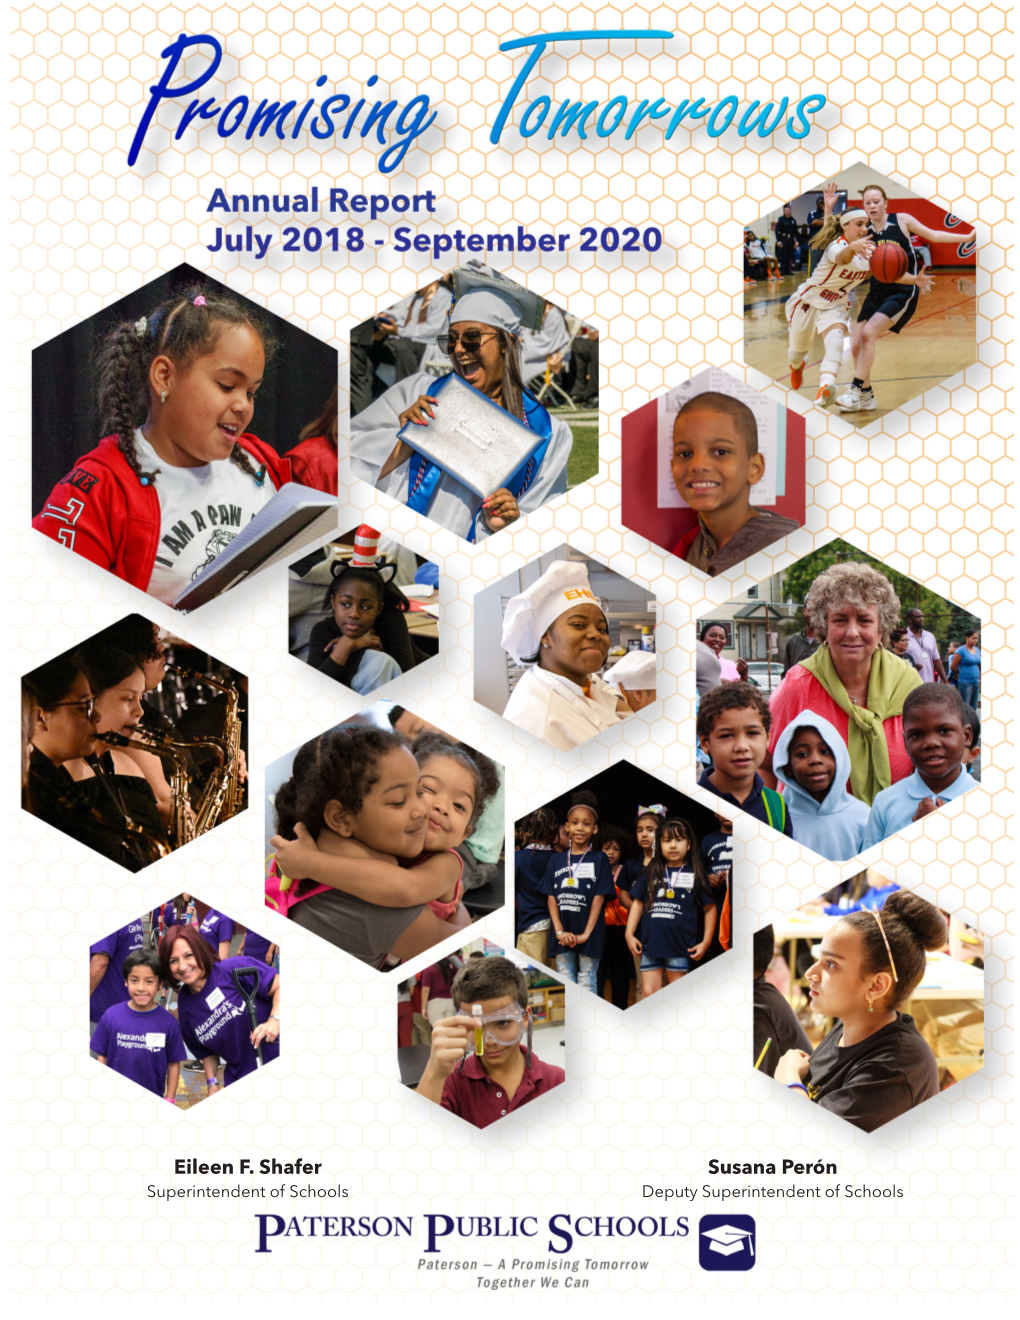 Annual Report July 2018 - September 2020 Is a Publication of the Paterson Public Schools Communications Department